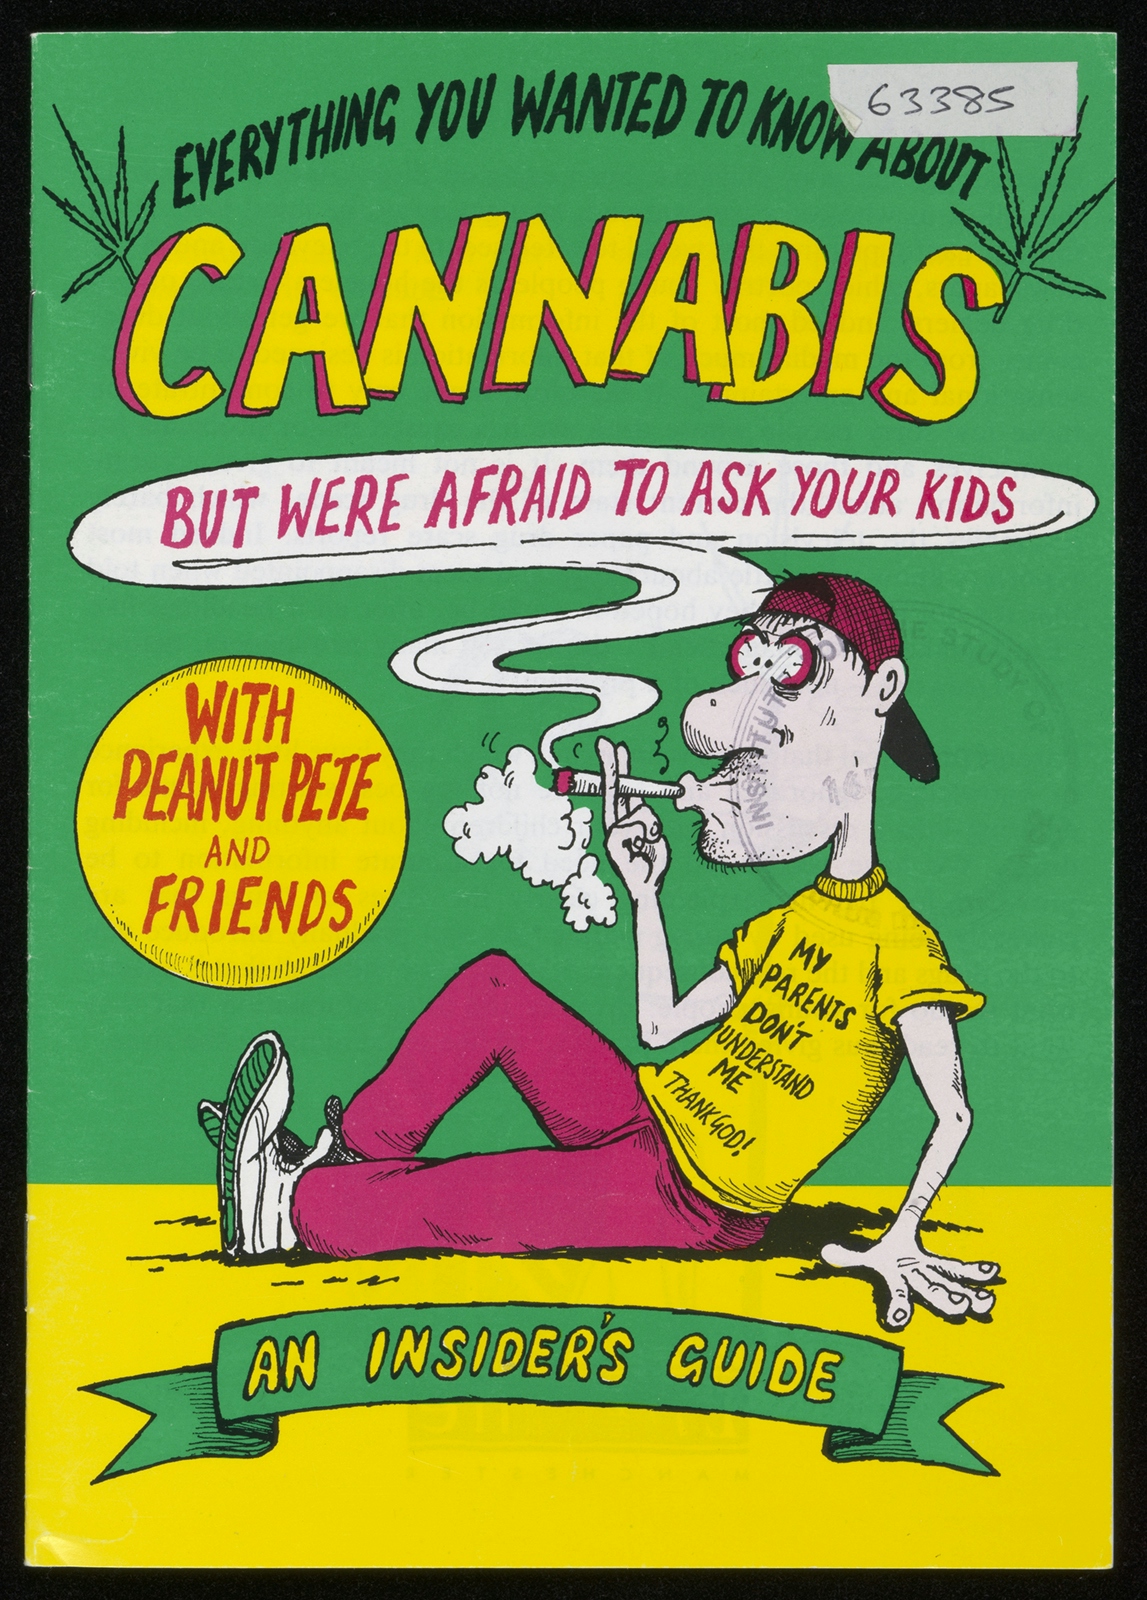 Pamphlet front cover with bright green, yellow and pink text and cartoon style imagery.